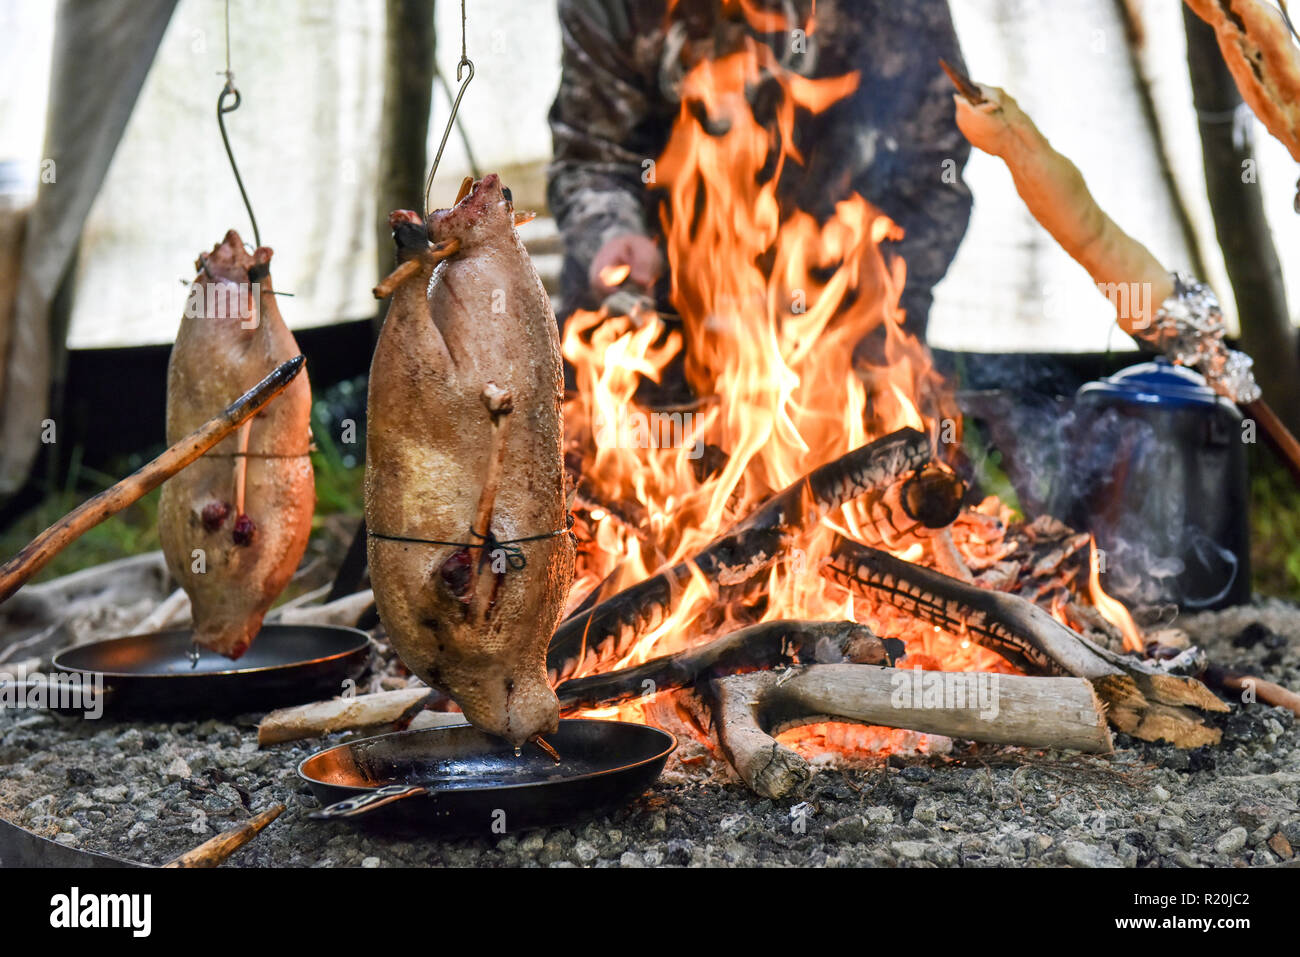 Geese cooking in a fire inside a teepee, Indigenous people, Northern Quebec Stock Photo